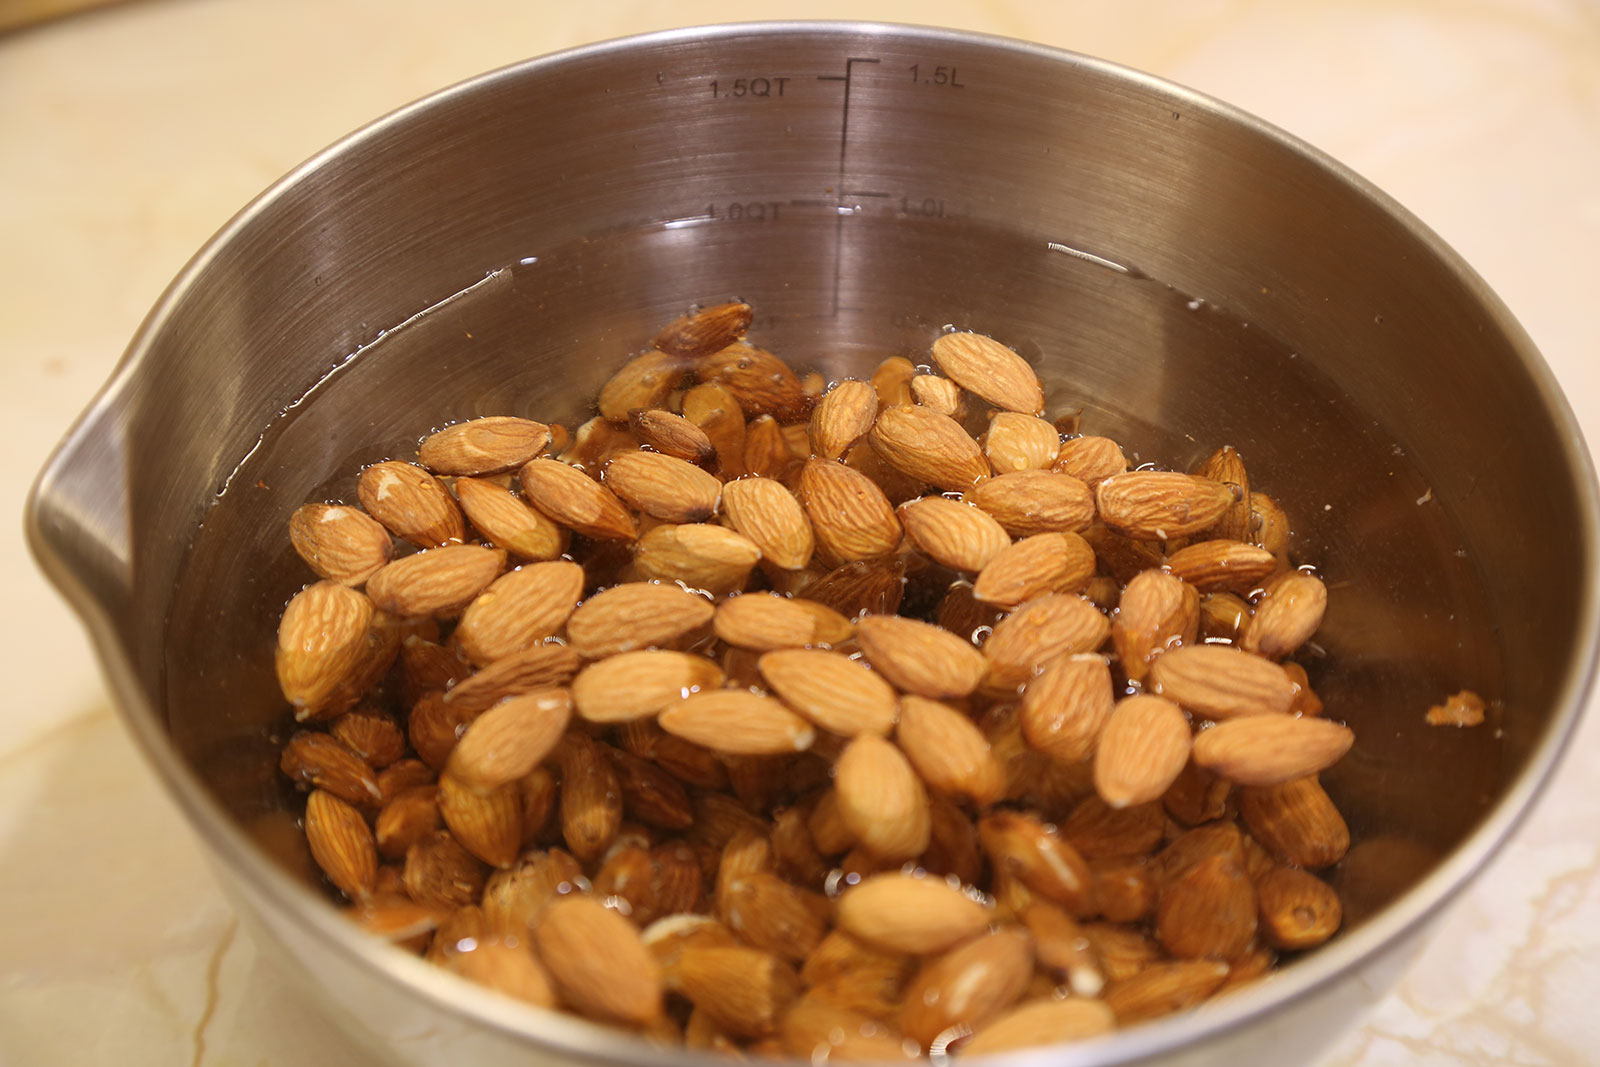 Soak the almonds overnight in a bowl of filtered water.